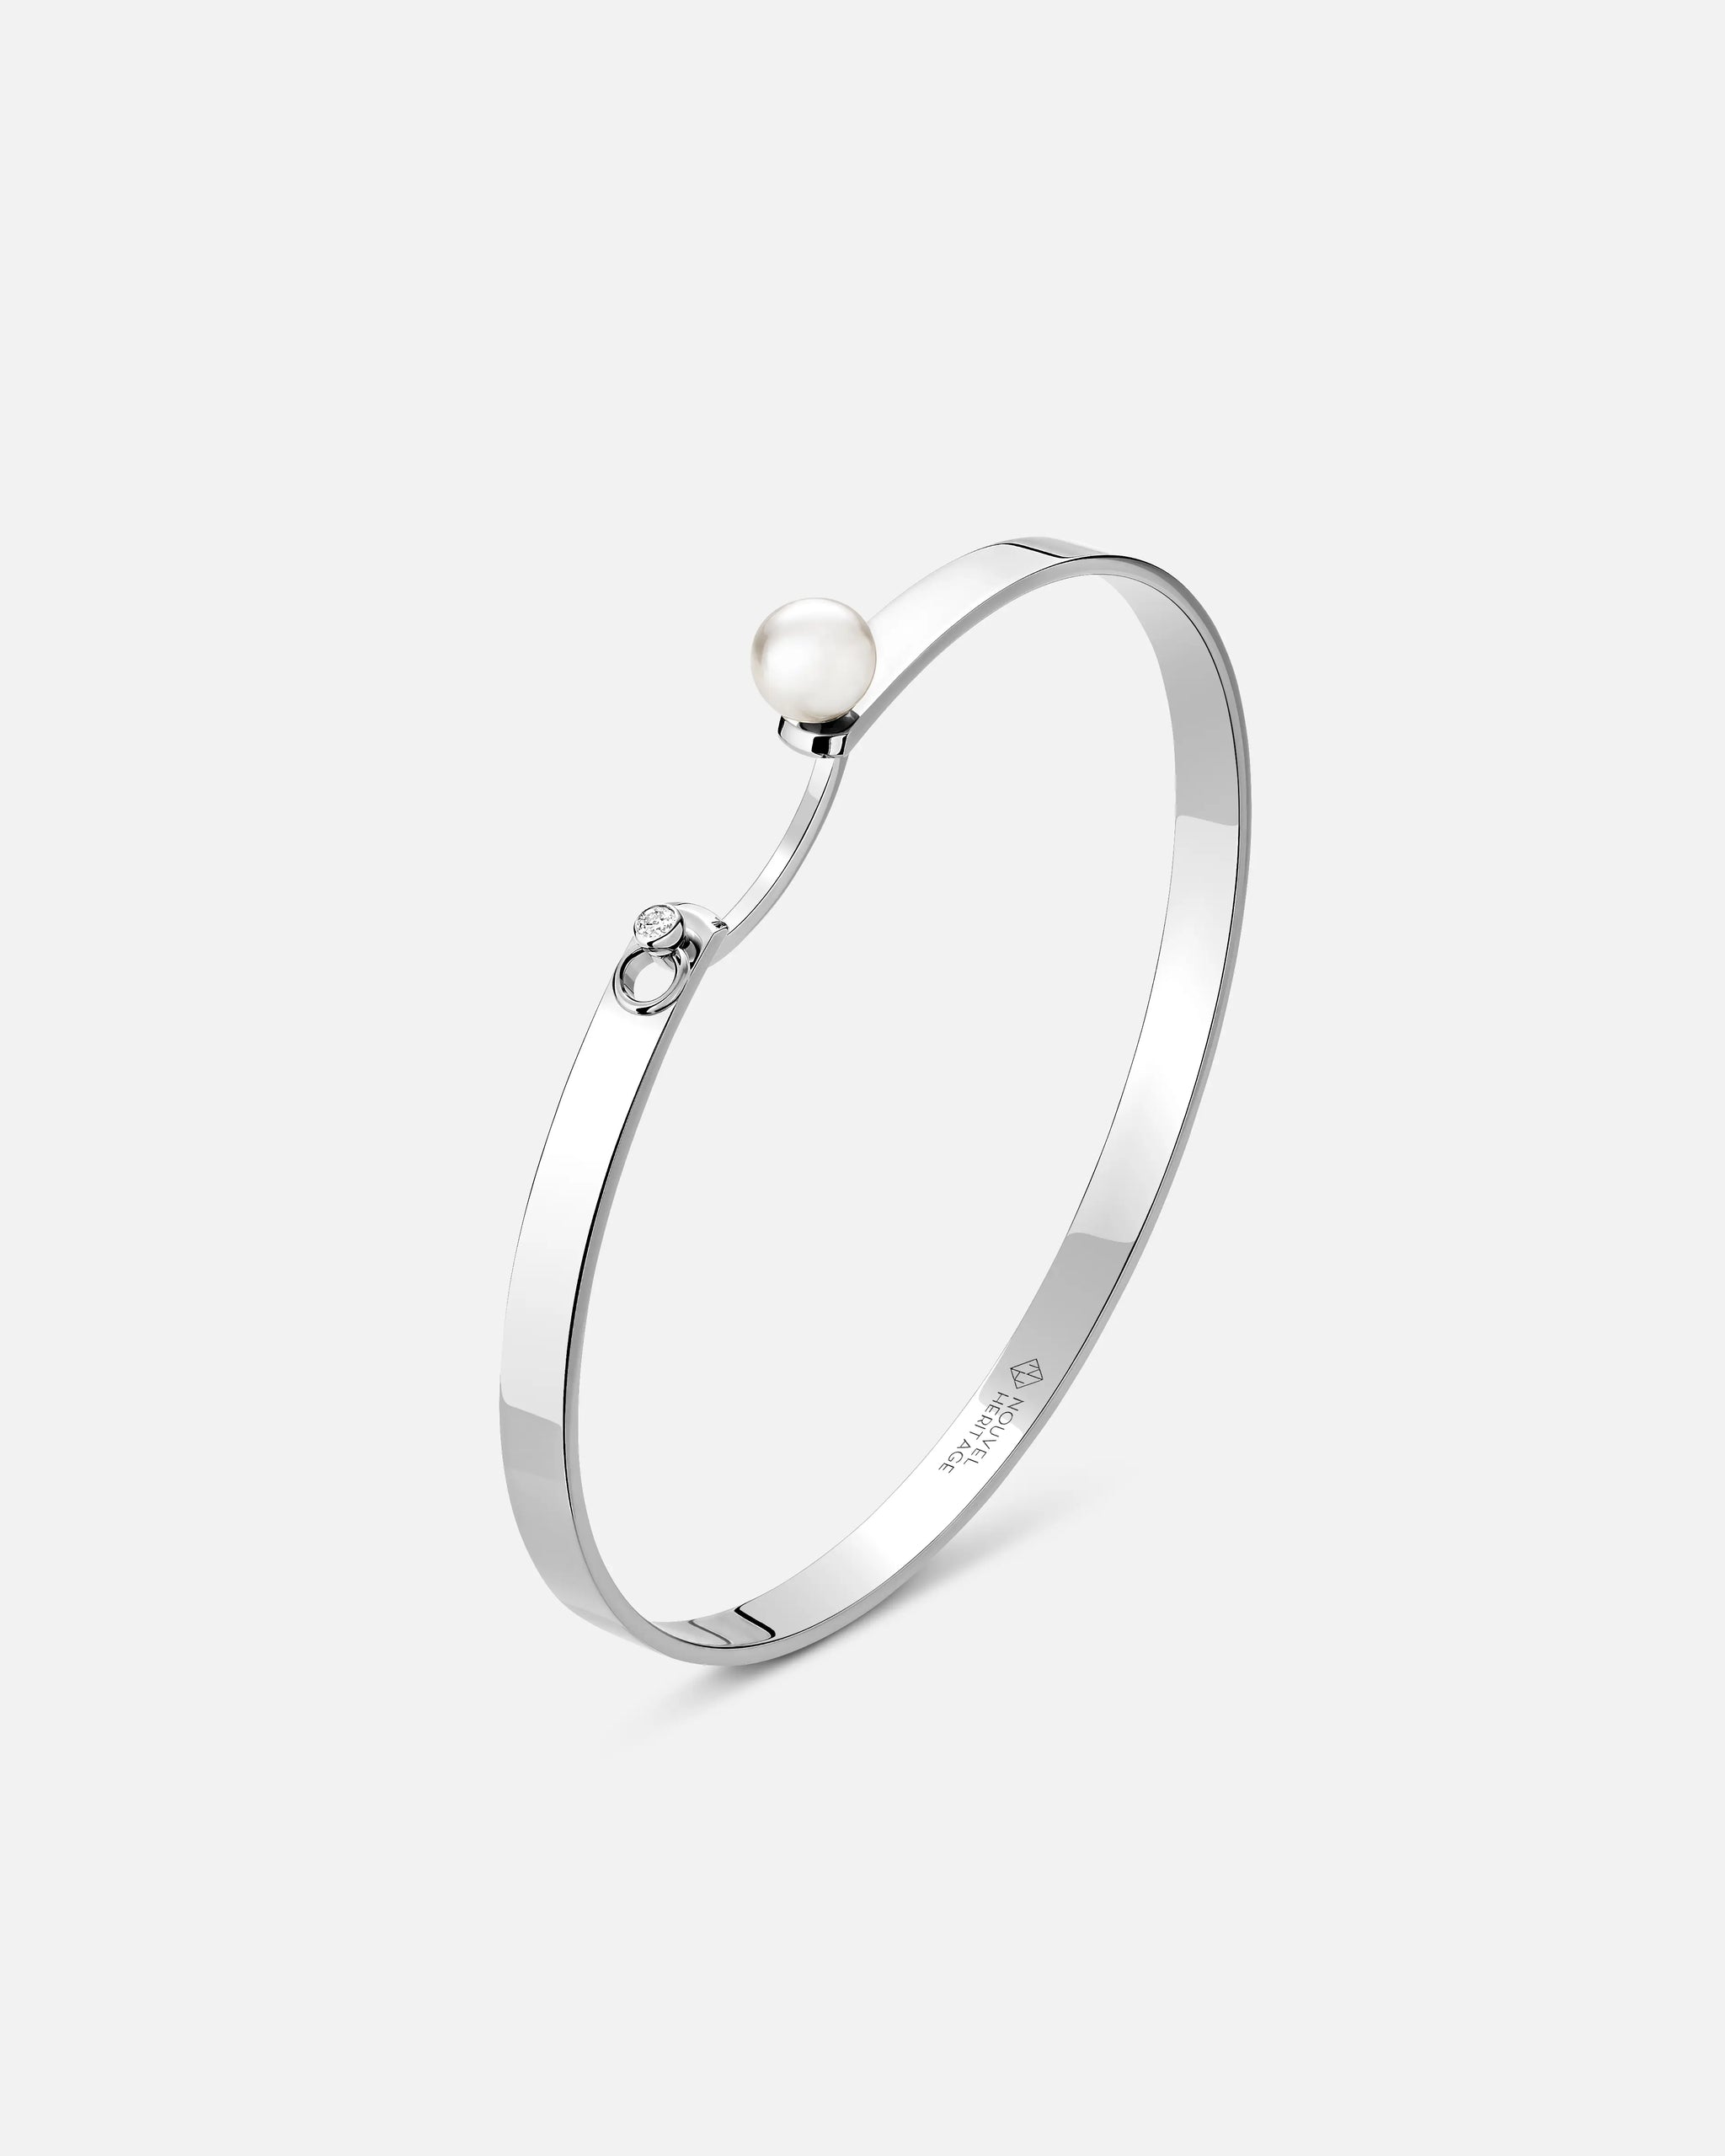 Lunch With Mom Mood Bangle in White Gold - 1 - Nouvel Heritage